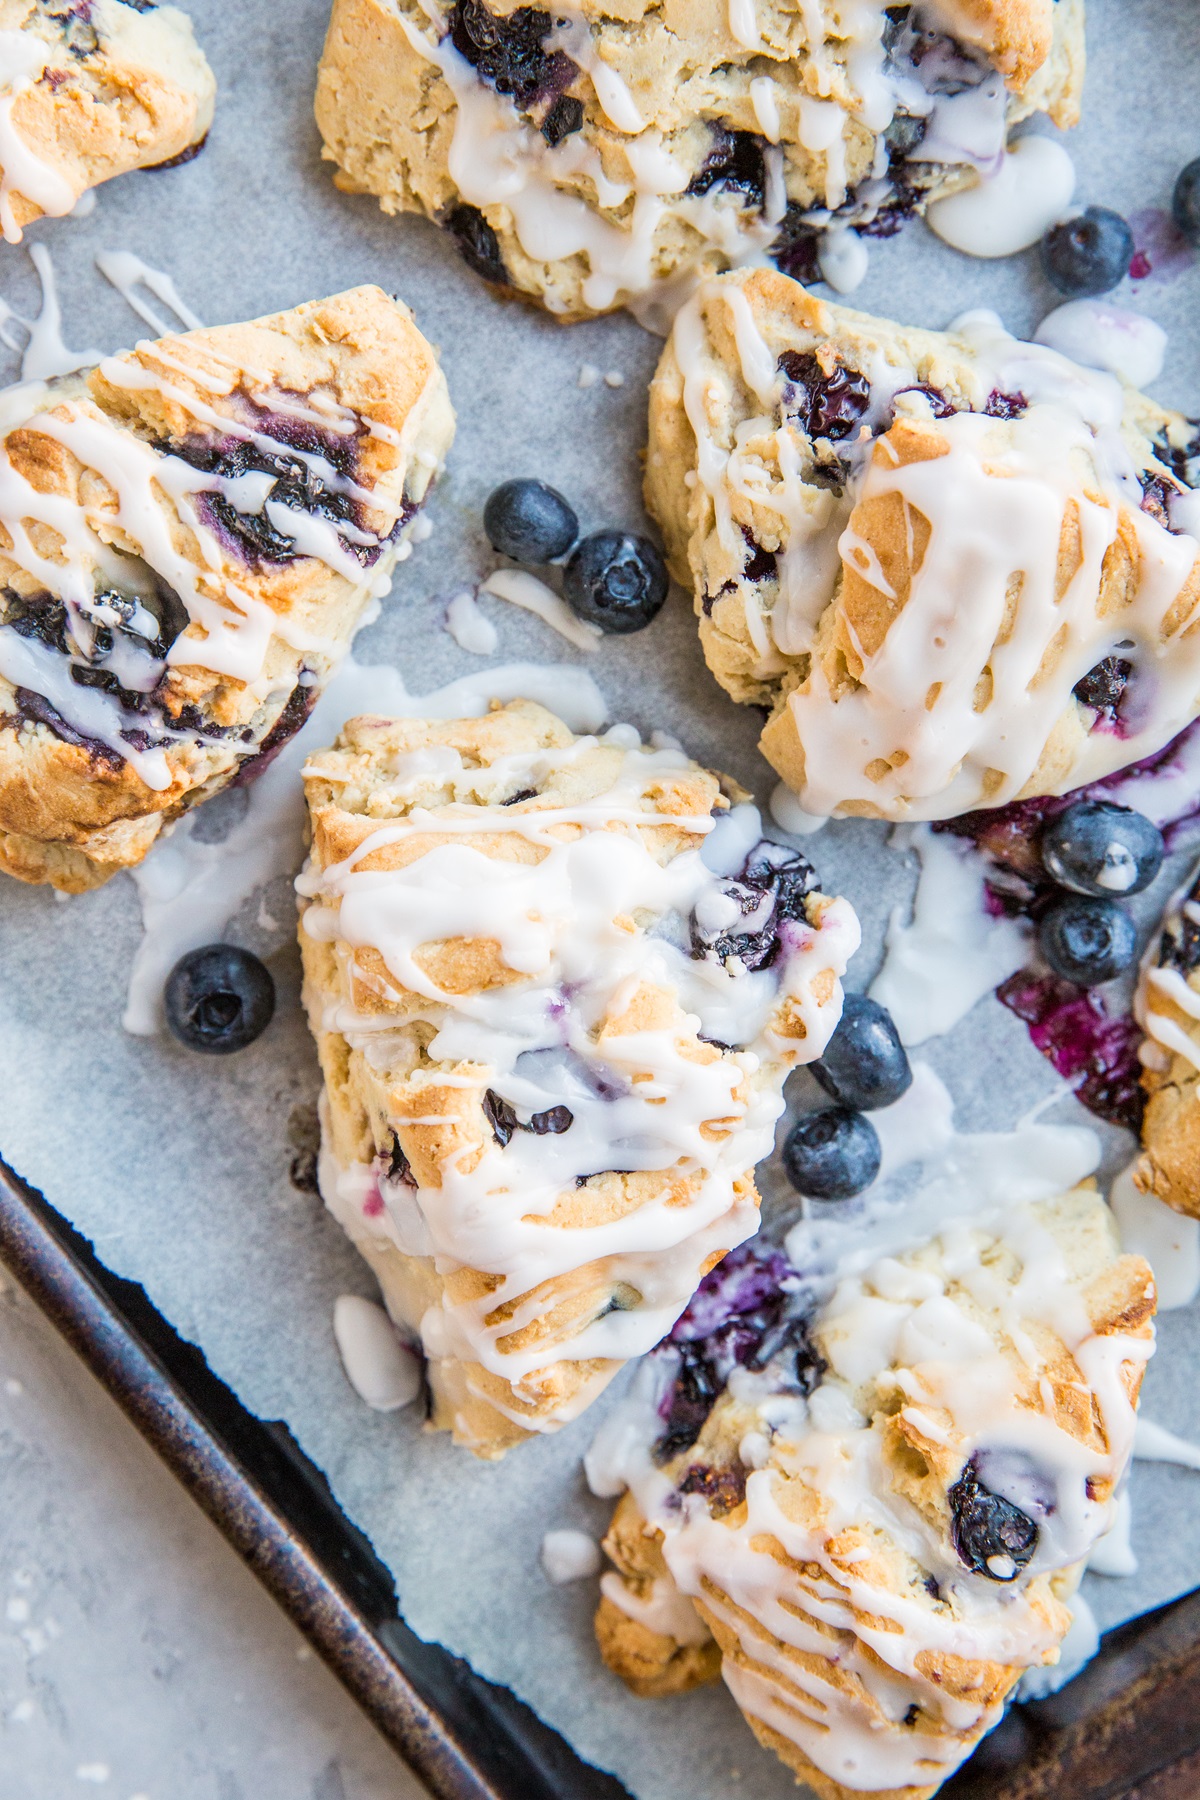 Gluten-Free Vegan Blueberry Scone Recipe made with 5 basic ingredients. This easy recipe requires zero baking experience!